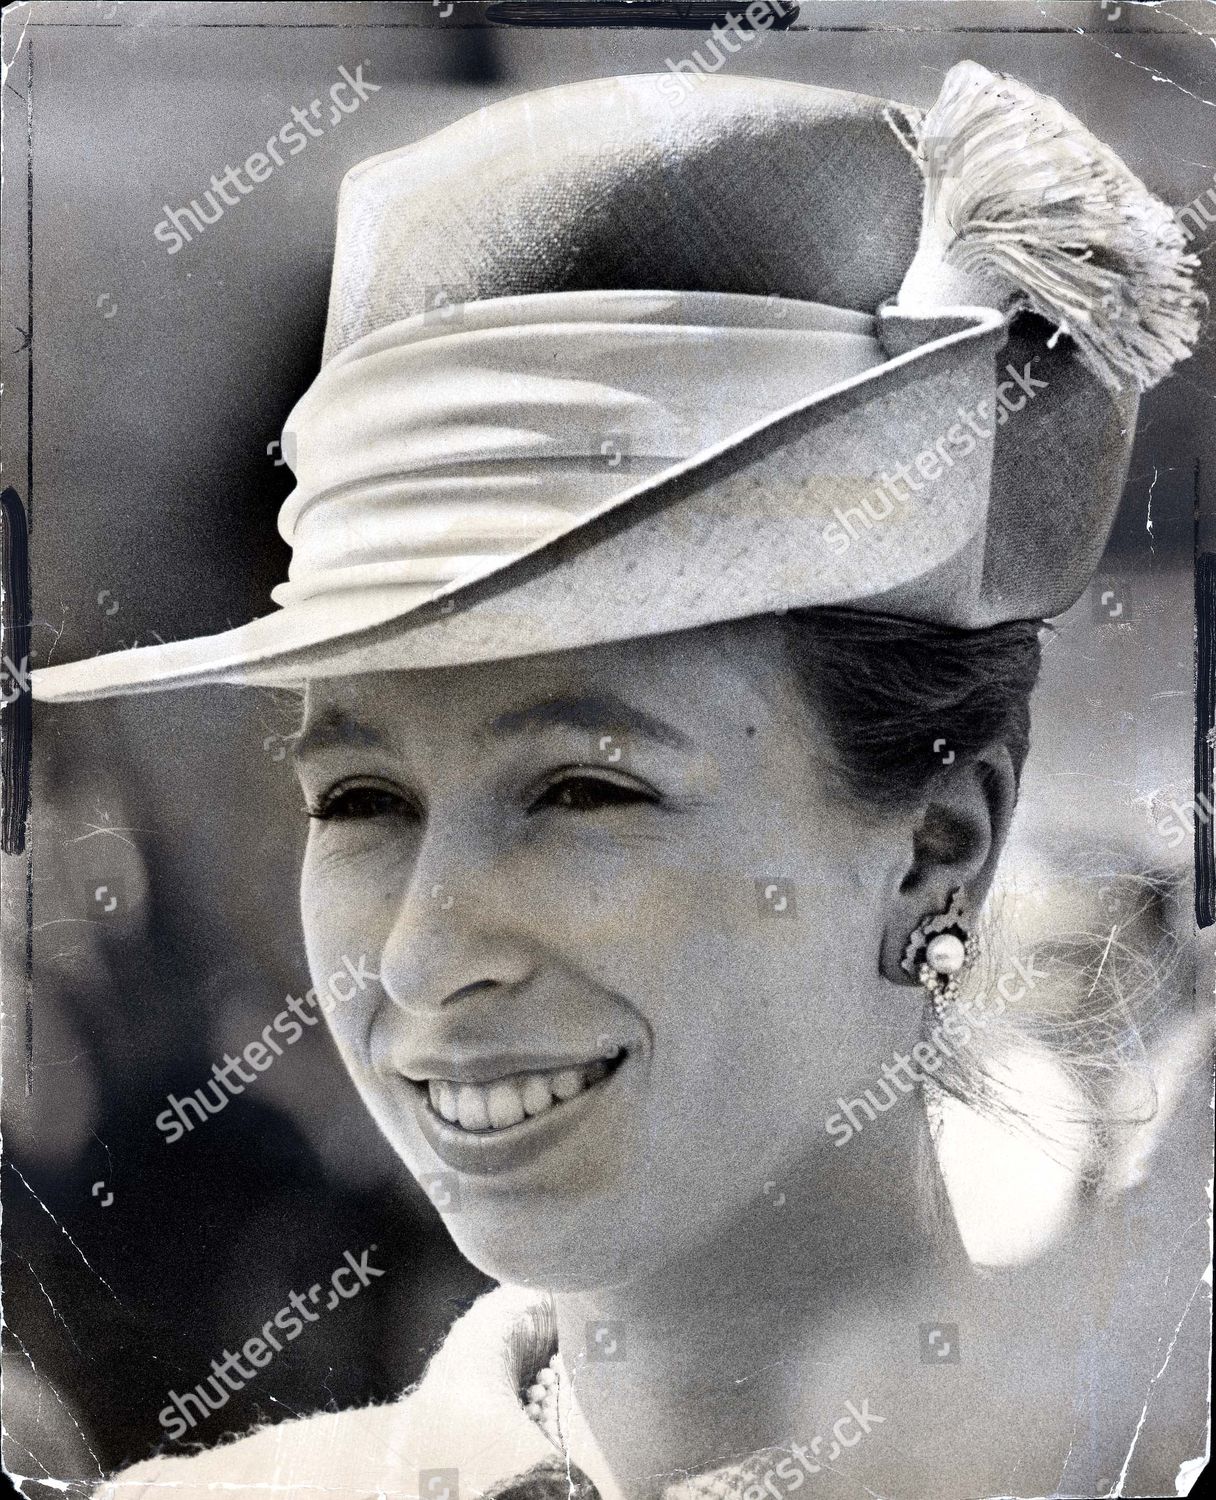 princess-anne-now-princess-royal-1970-picture-shows-h-r-h-princess-anne-arriving-back-at-london-airport-4th-may-after-a-9-week-royal-tour-of-australasia-h-r-h-princess-anne-in-a-check-mini-coat-and-australian-style-bush-hat-shutterstock-editorial-890855a.jpg